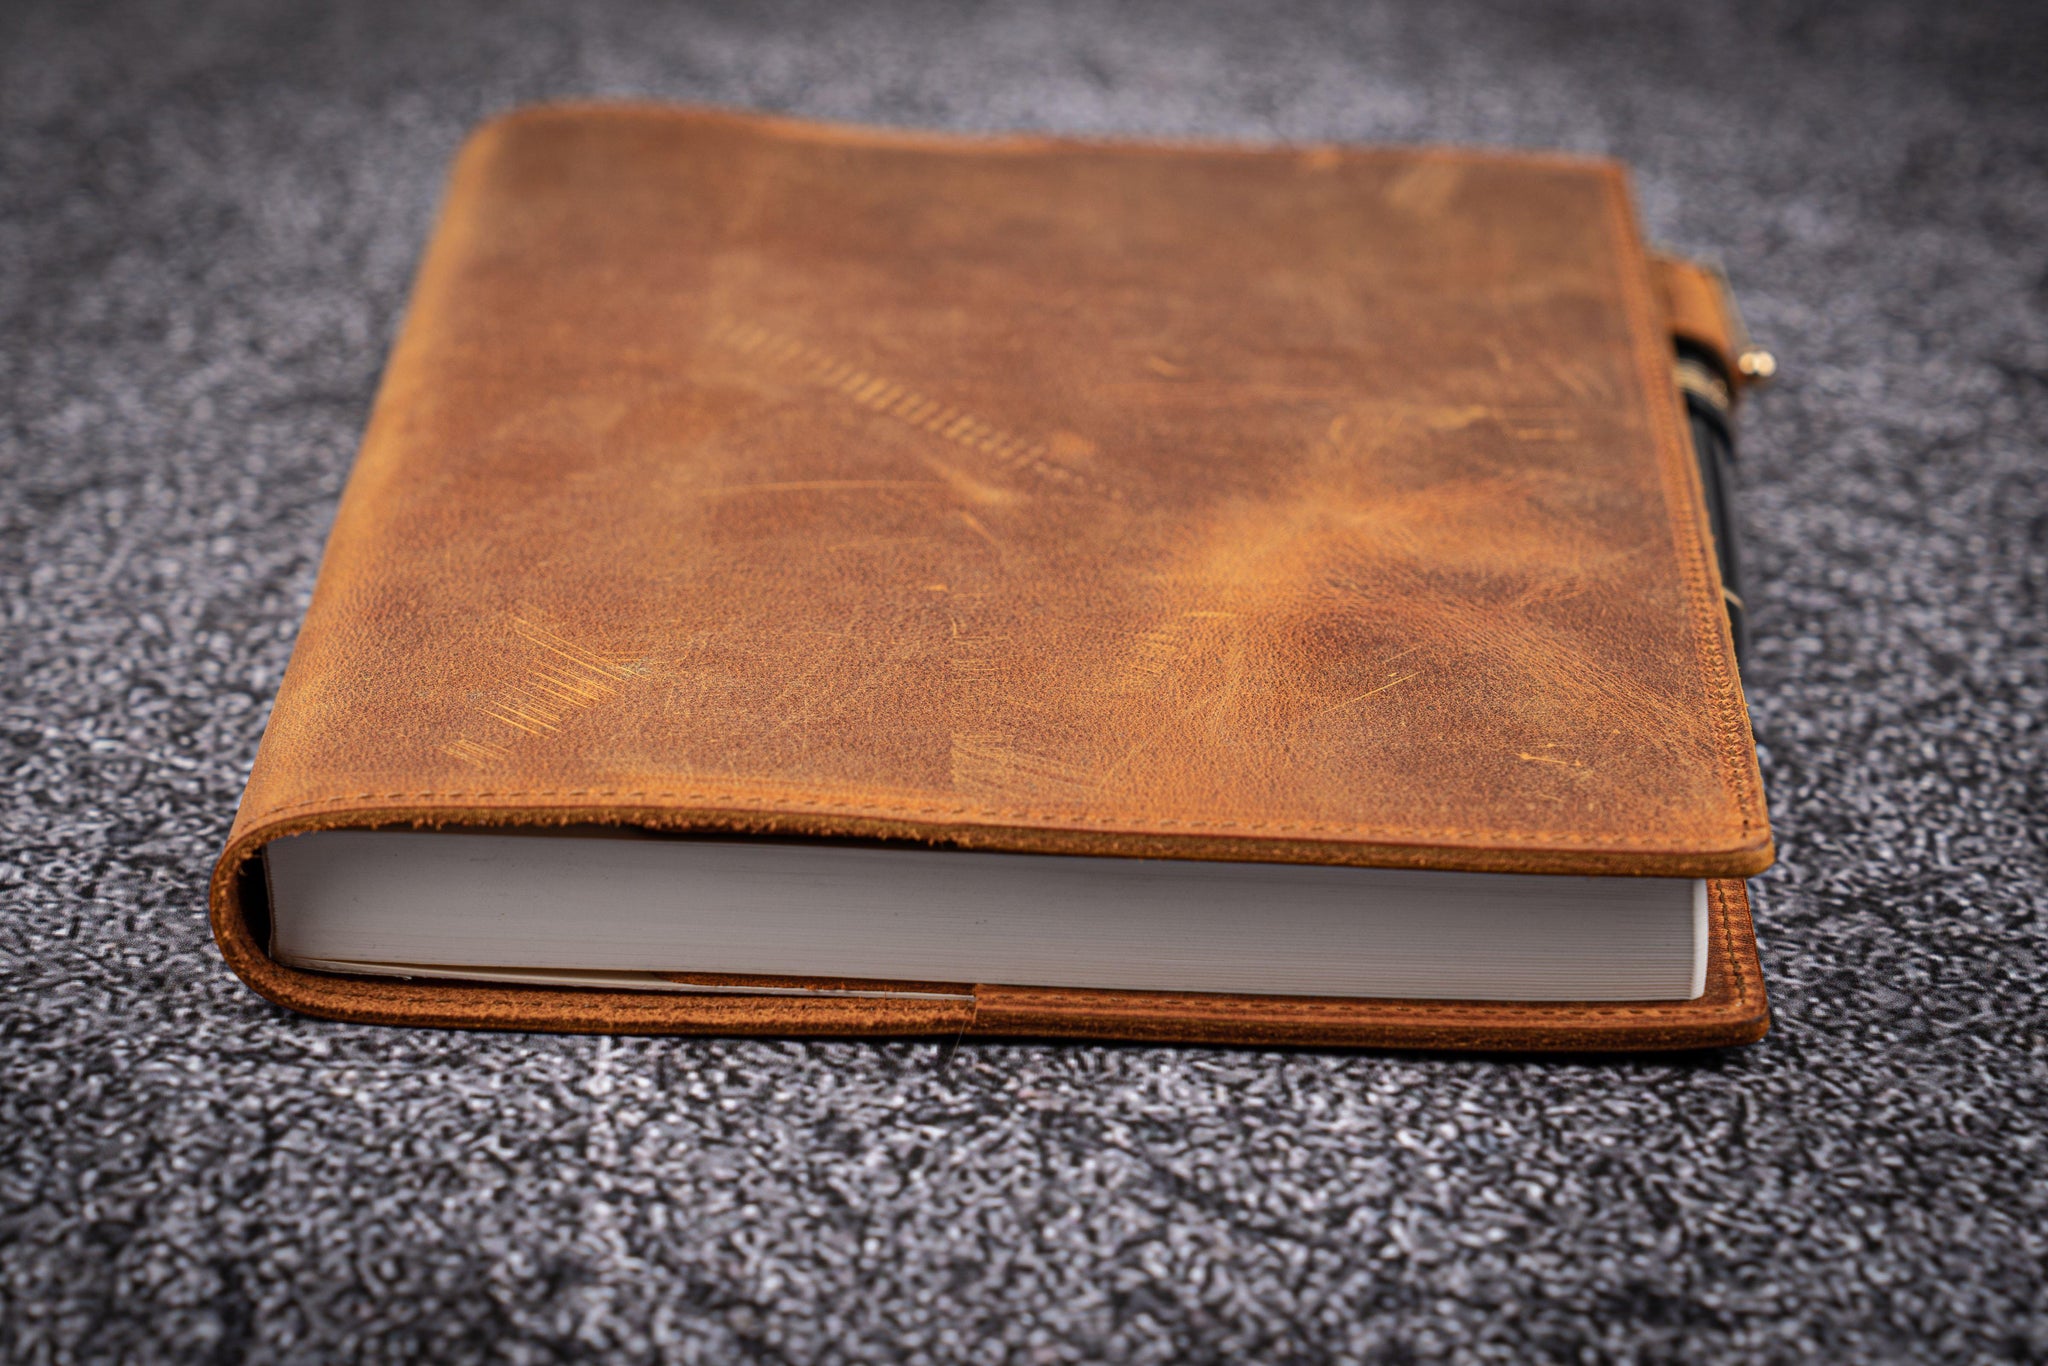 Leather Slim A5 Notebook / Planner Cover - Crazy Horse Brown